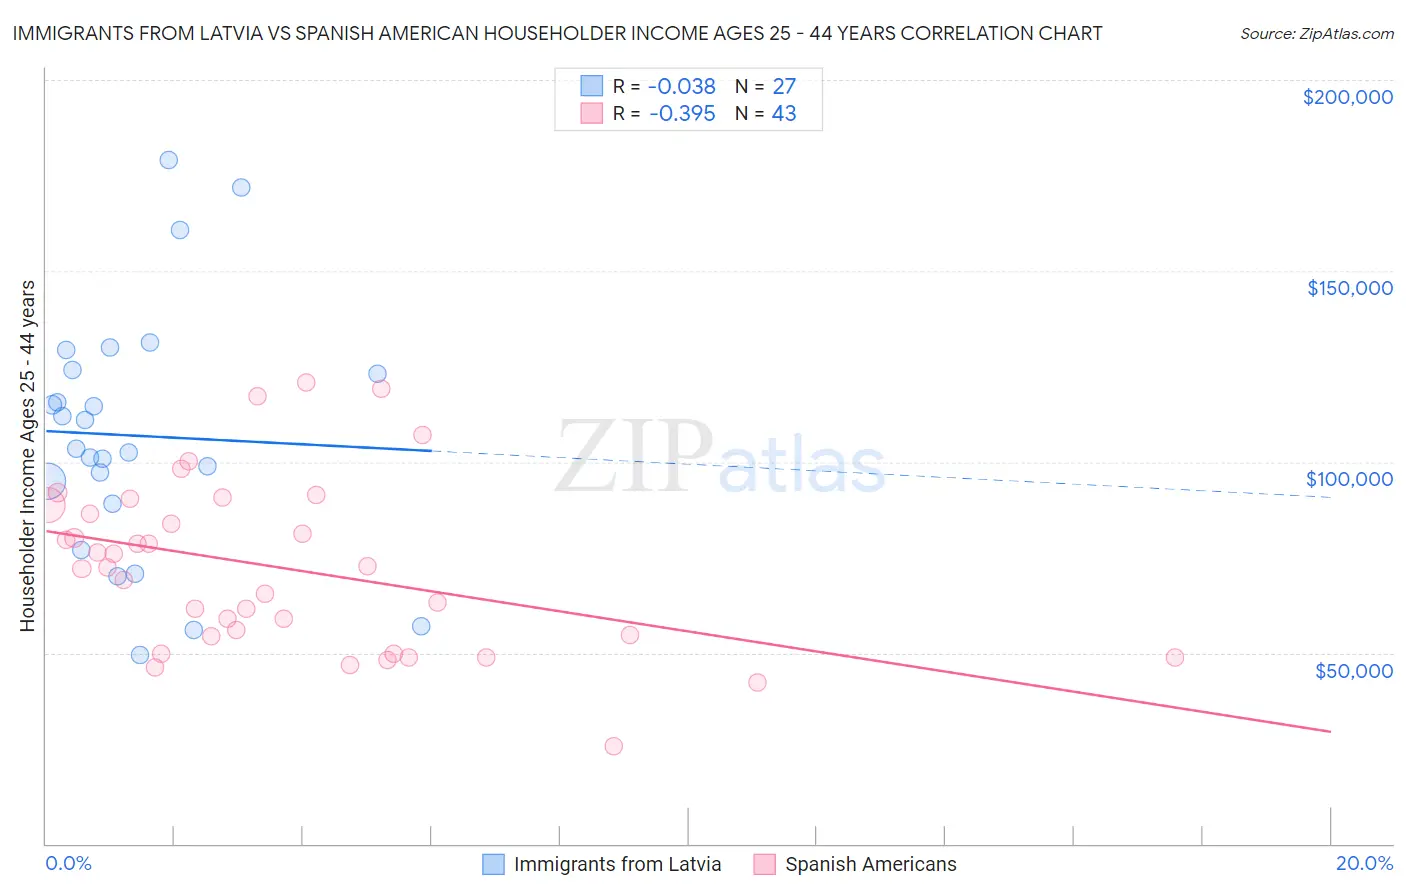 Immigrants from Latvia vs Spanish American Householder Income Ages 25 - 44 years